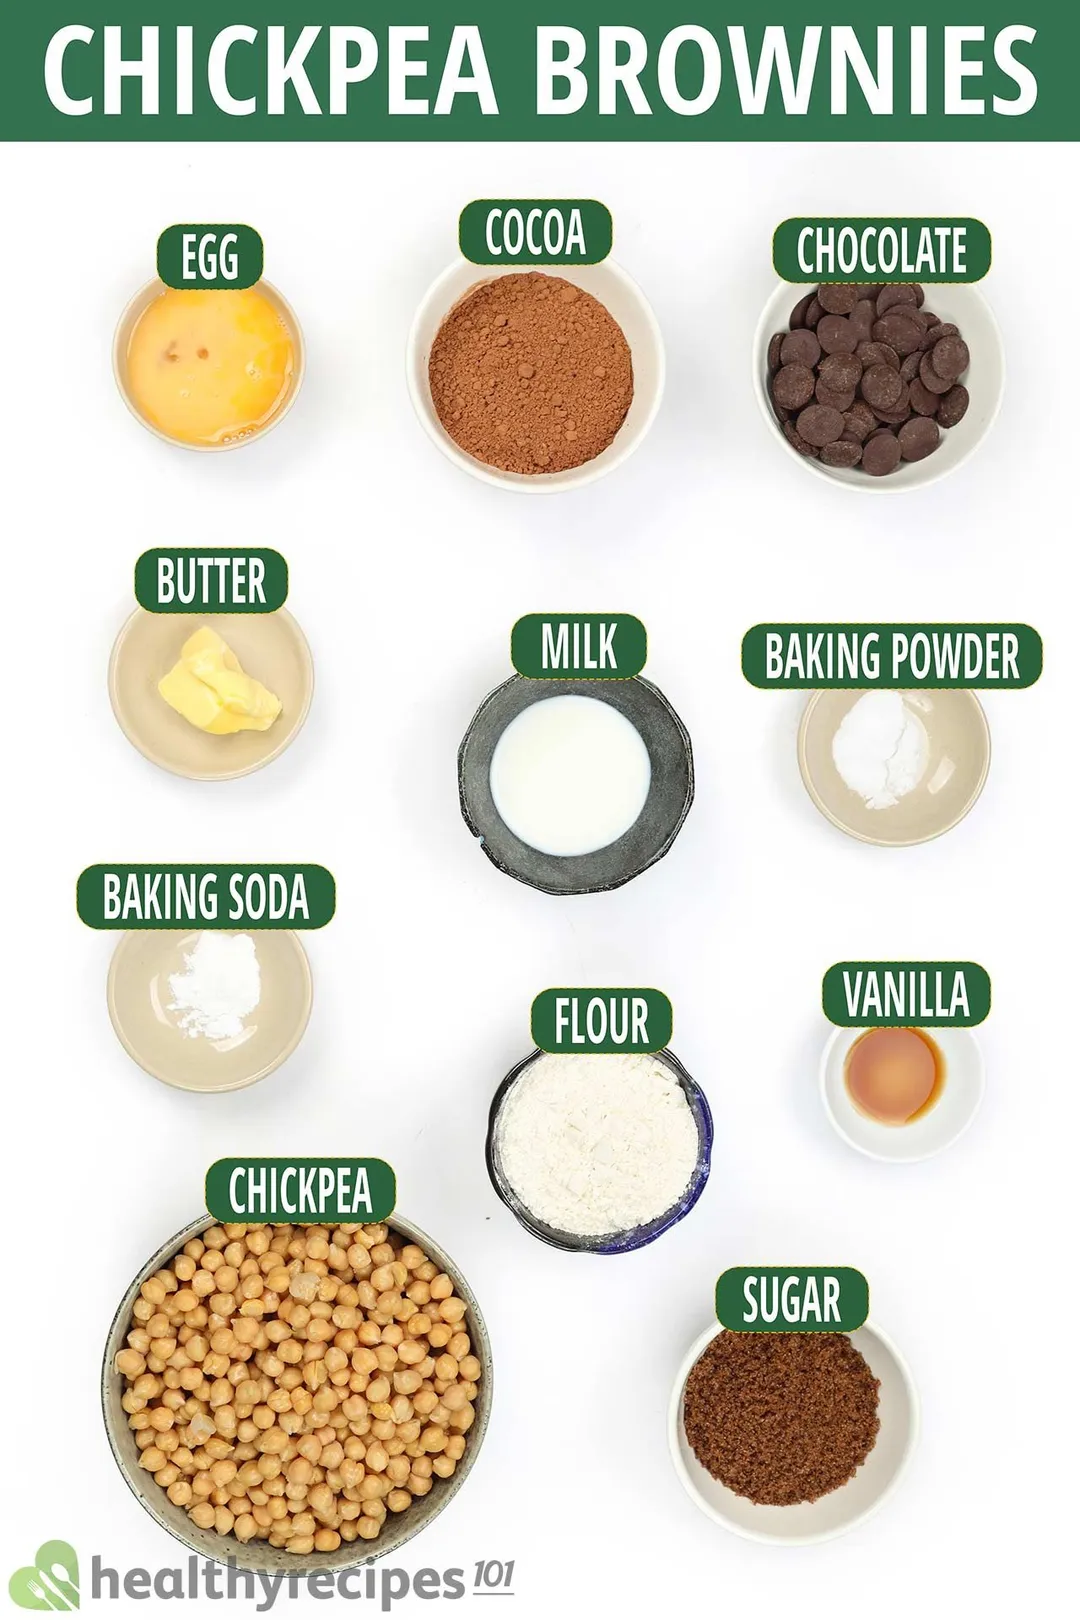 Ingredients for chickpea brownies, including chickpeas, chocolate chips, cocoa powder, and other baking essentials. 